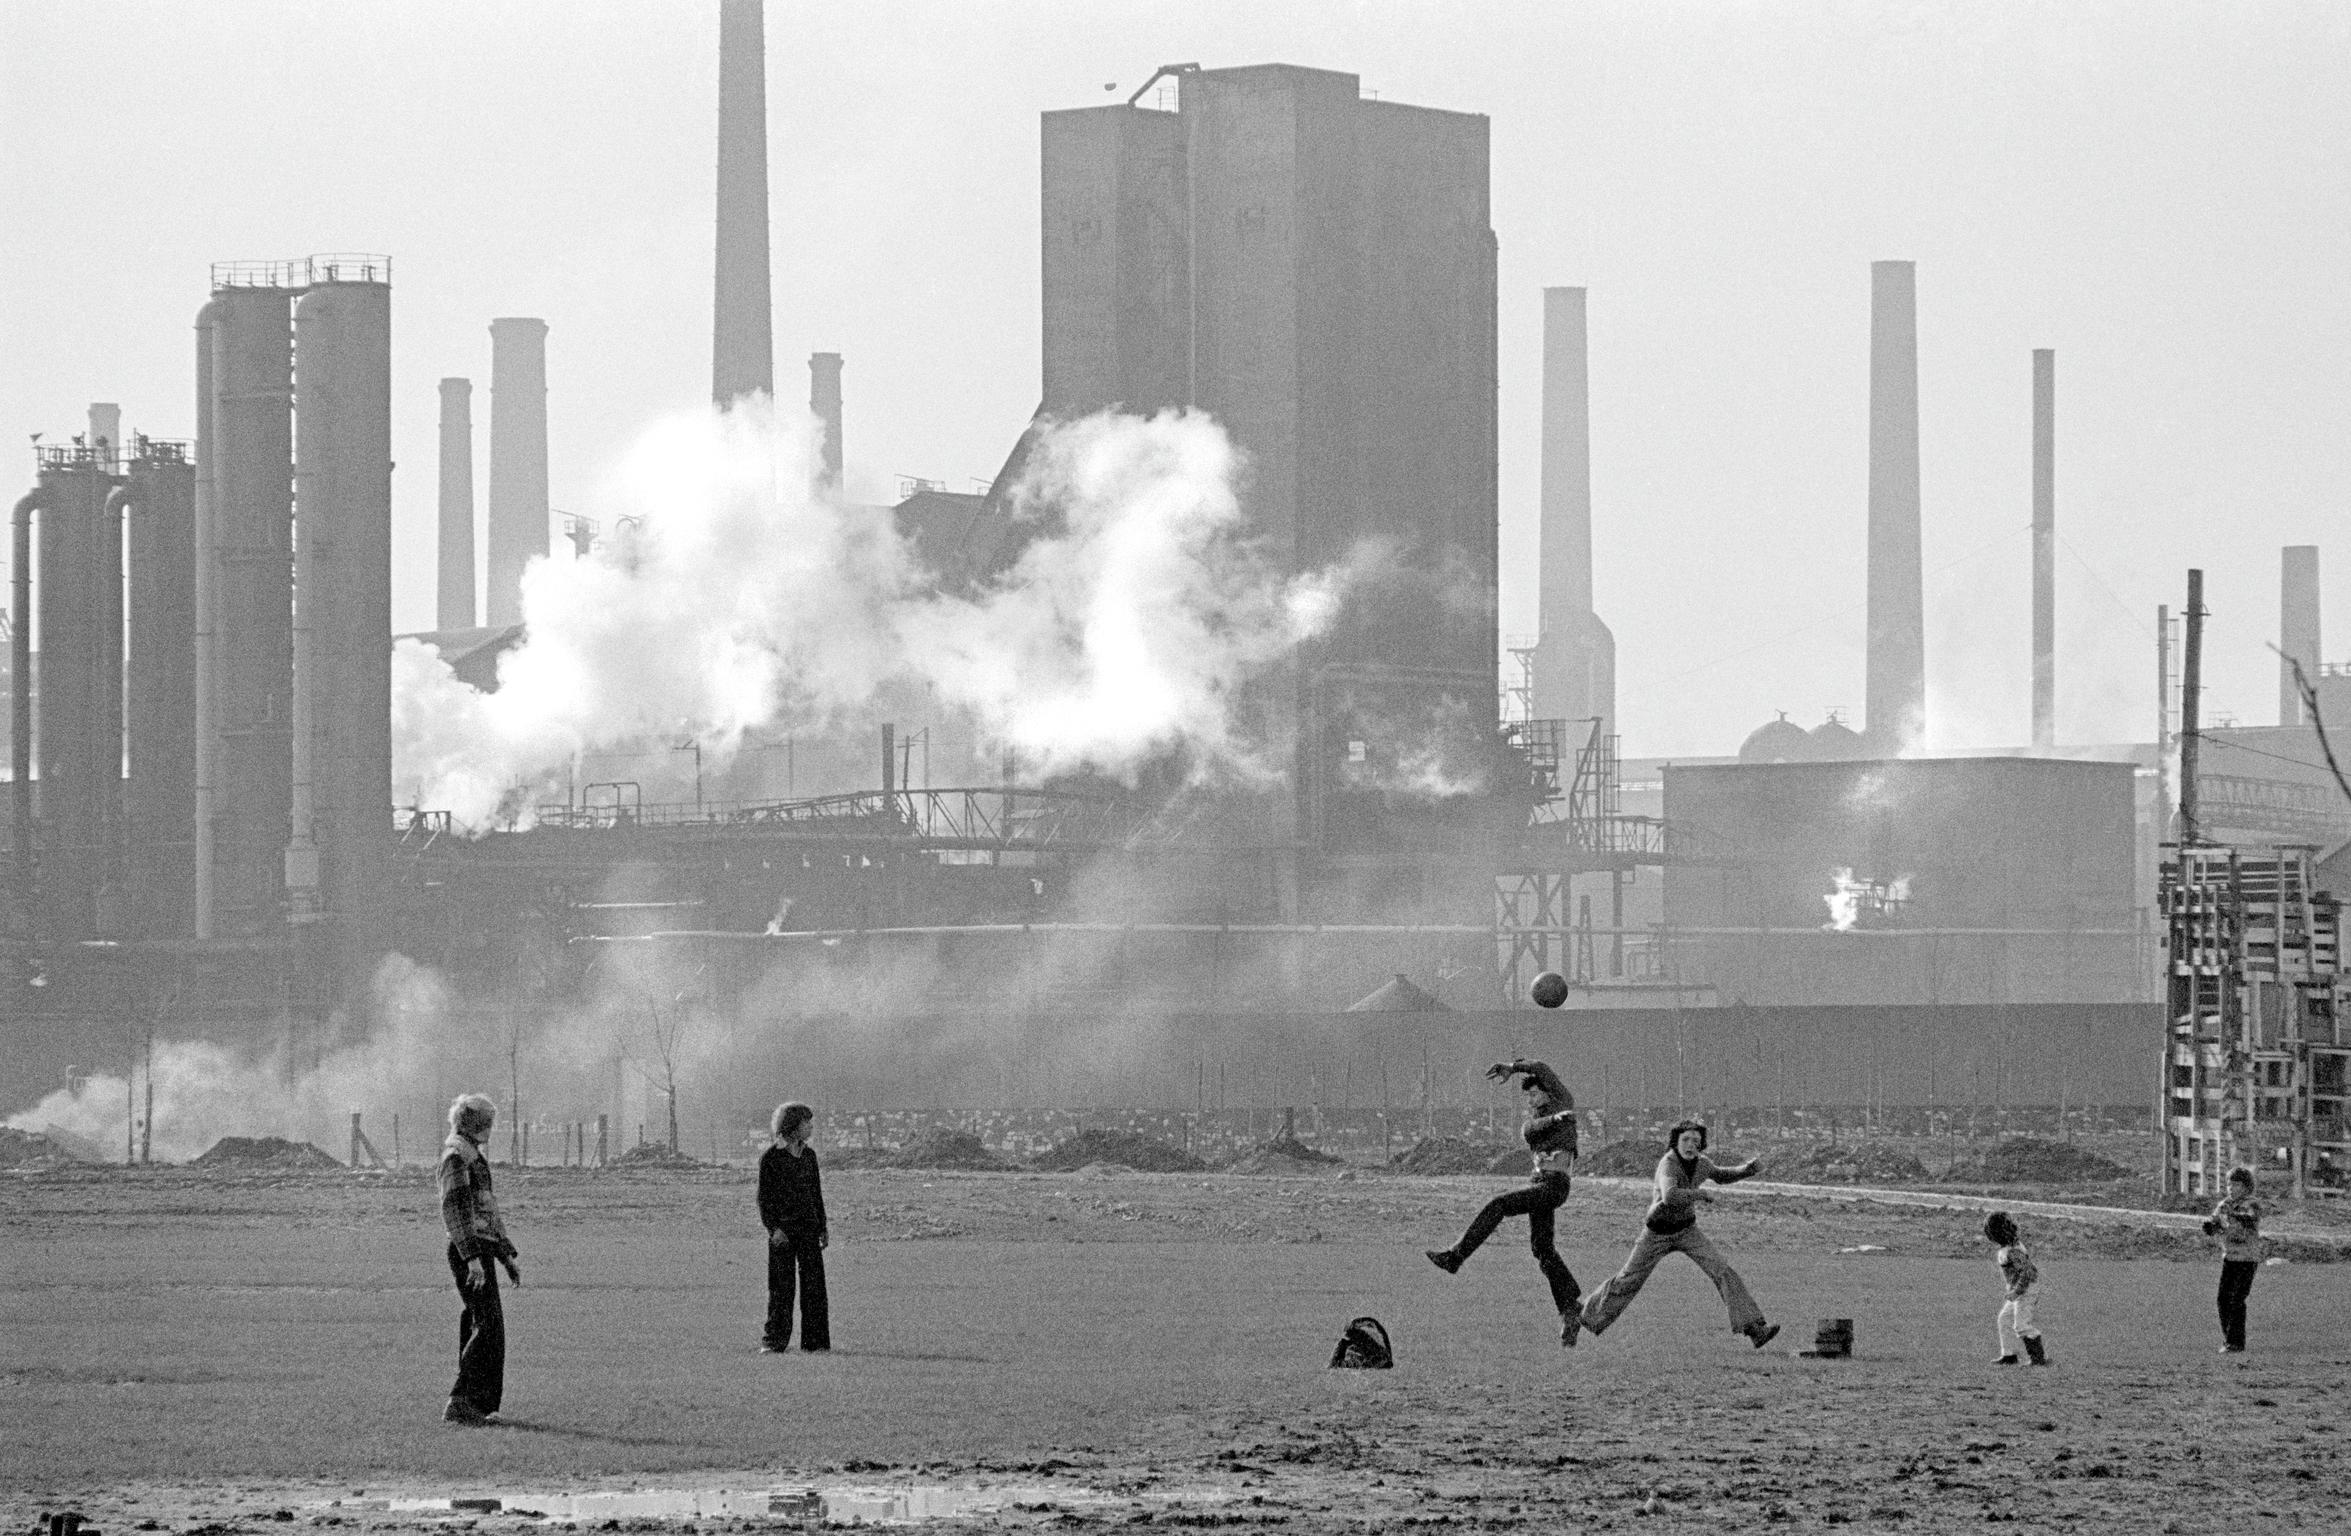 GB. WALES. Cardiff. During the last days before the closs down of East Moors steel in cardiff. 1978.